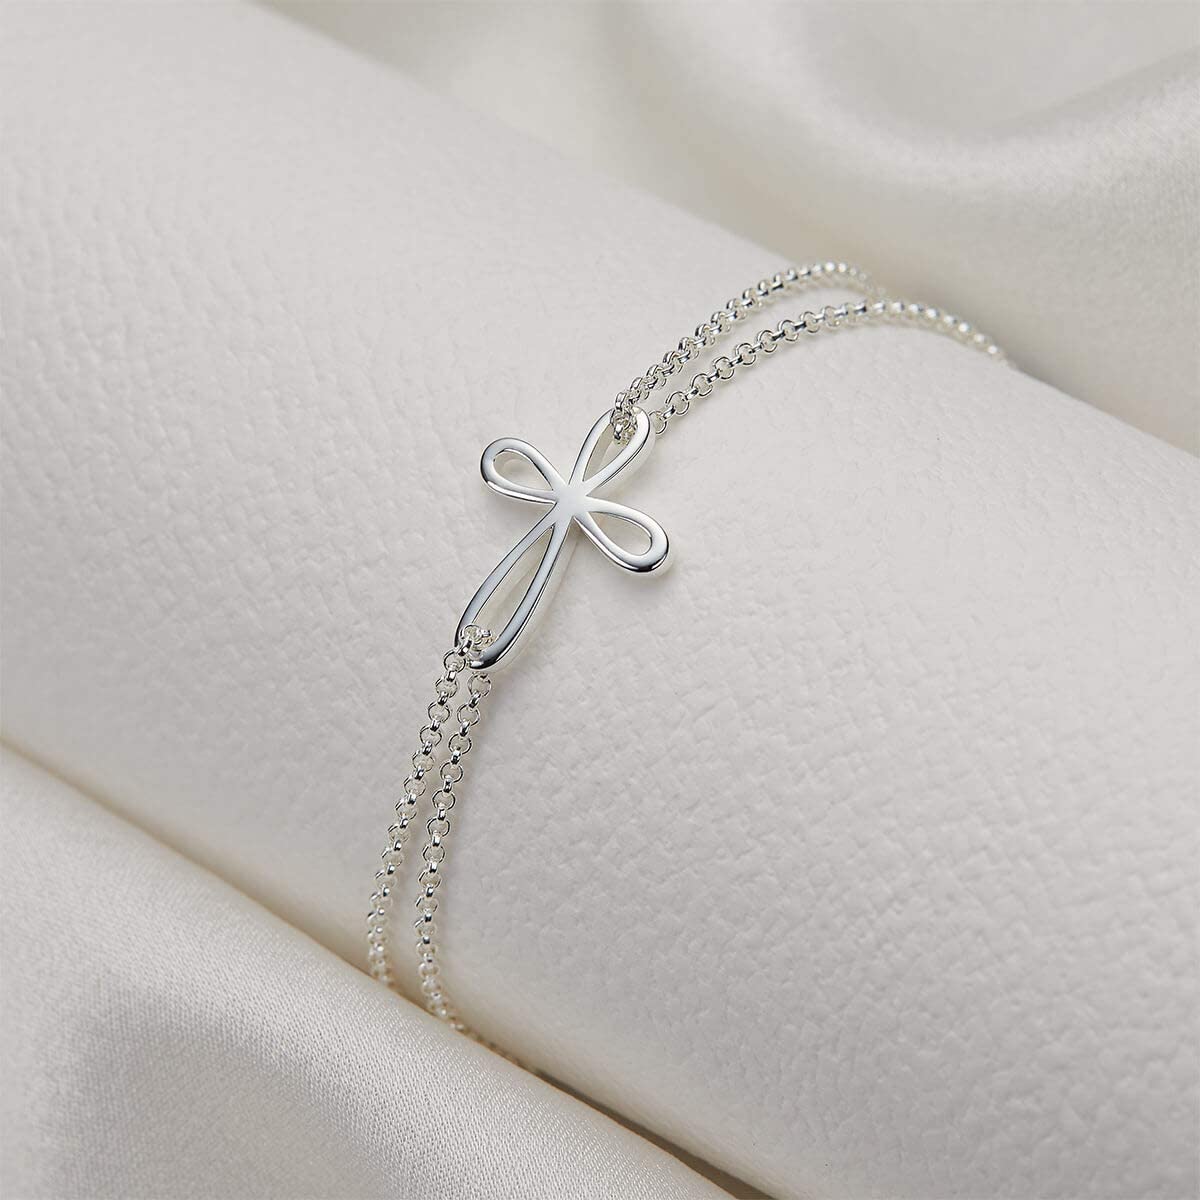 Molly B London Sterling Silver Cross Bracelet. Adjustable Jewelry Charm Chain Bracelets for Girls. Perfect First Communion Gifts for Girls, Baptism Gifts, Birthday Gift, Sweet 16